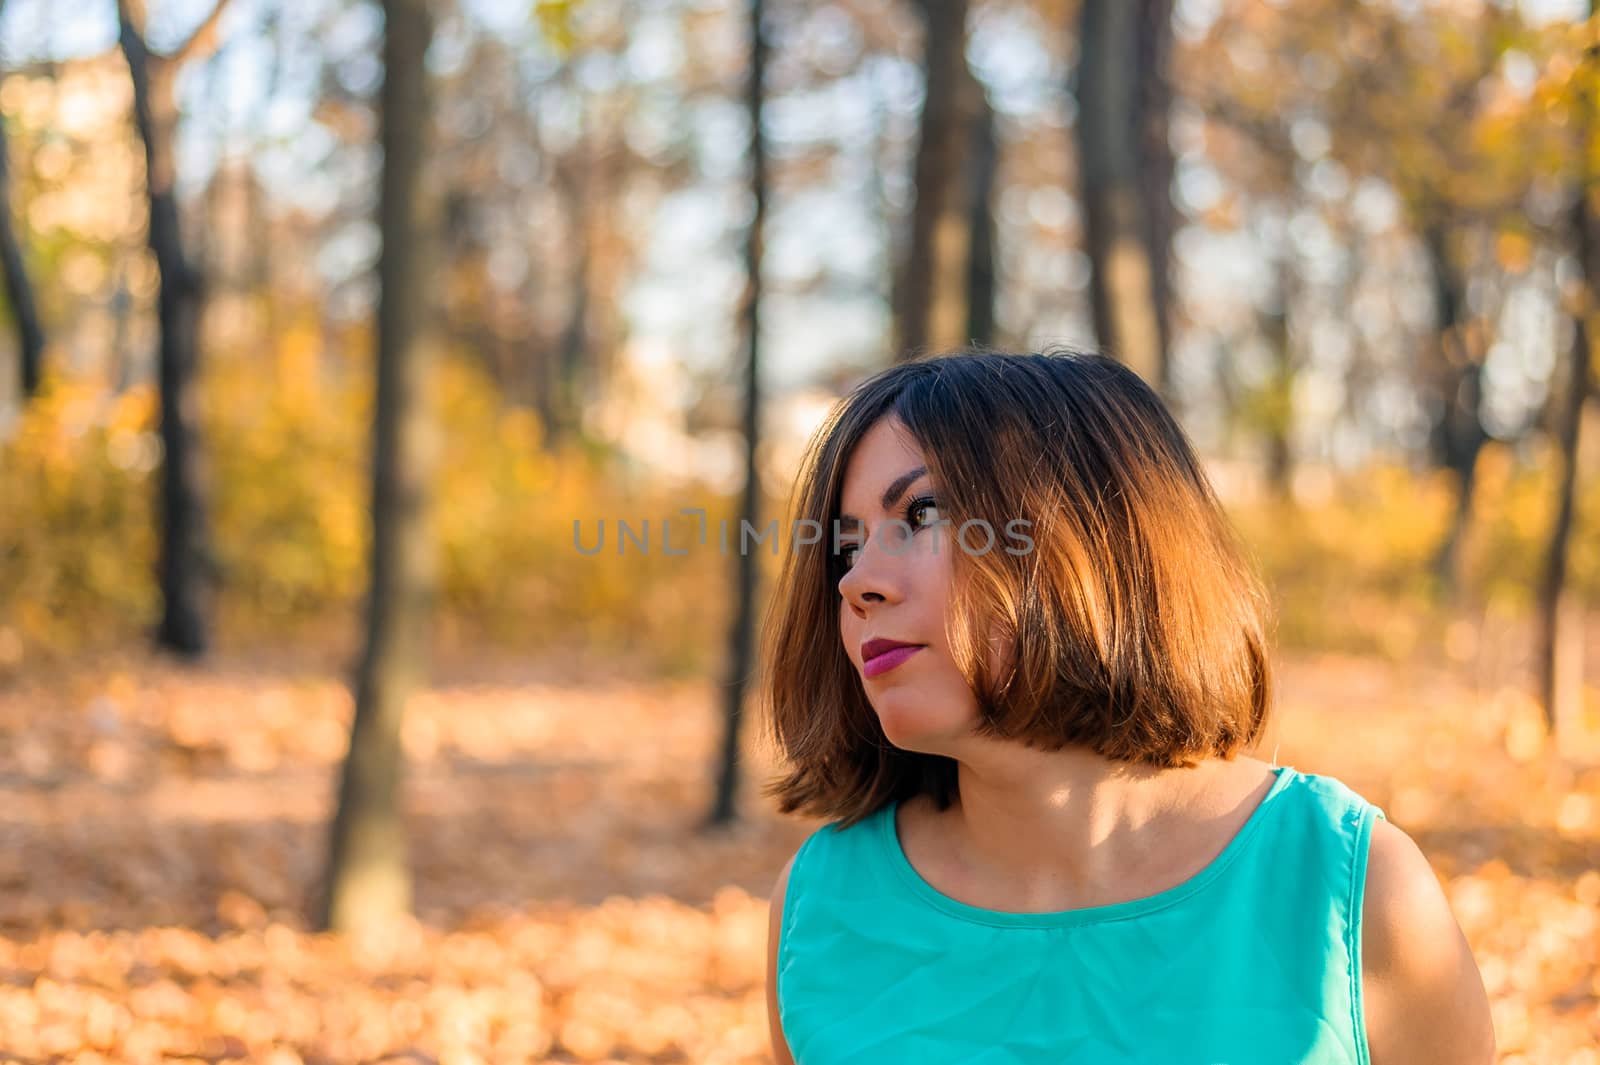 close portrait of a young woman with dark hair who looks away while standing in an autumn park